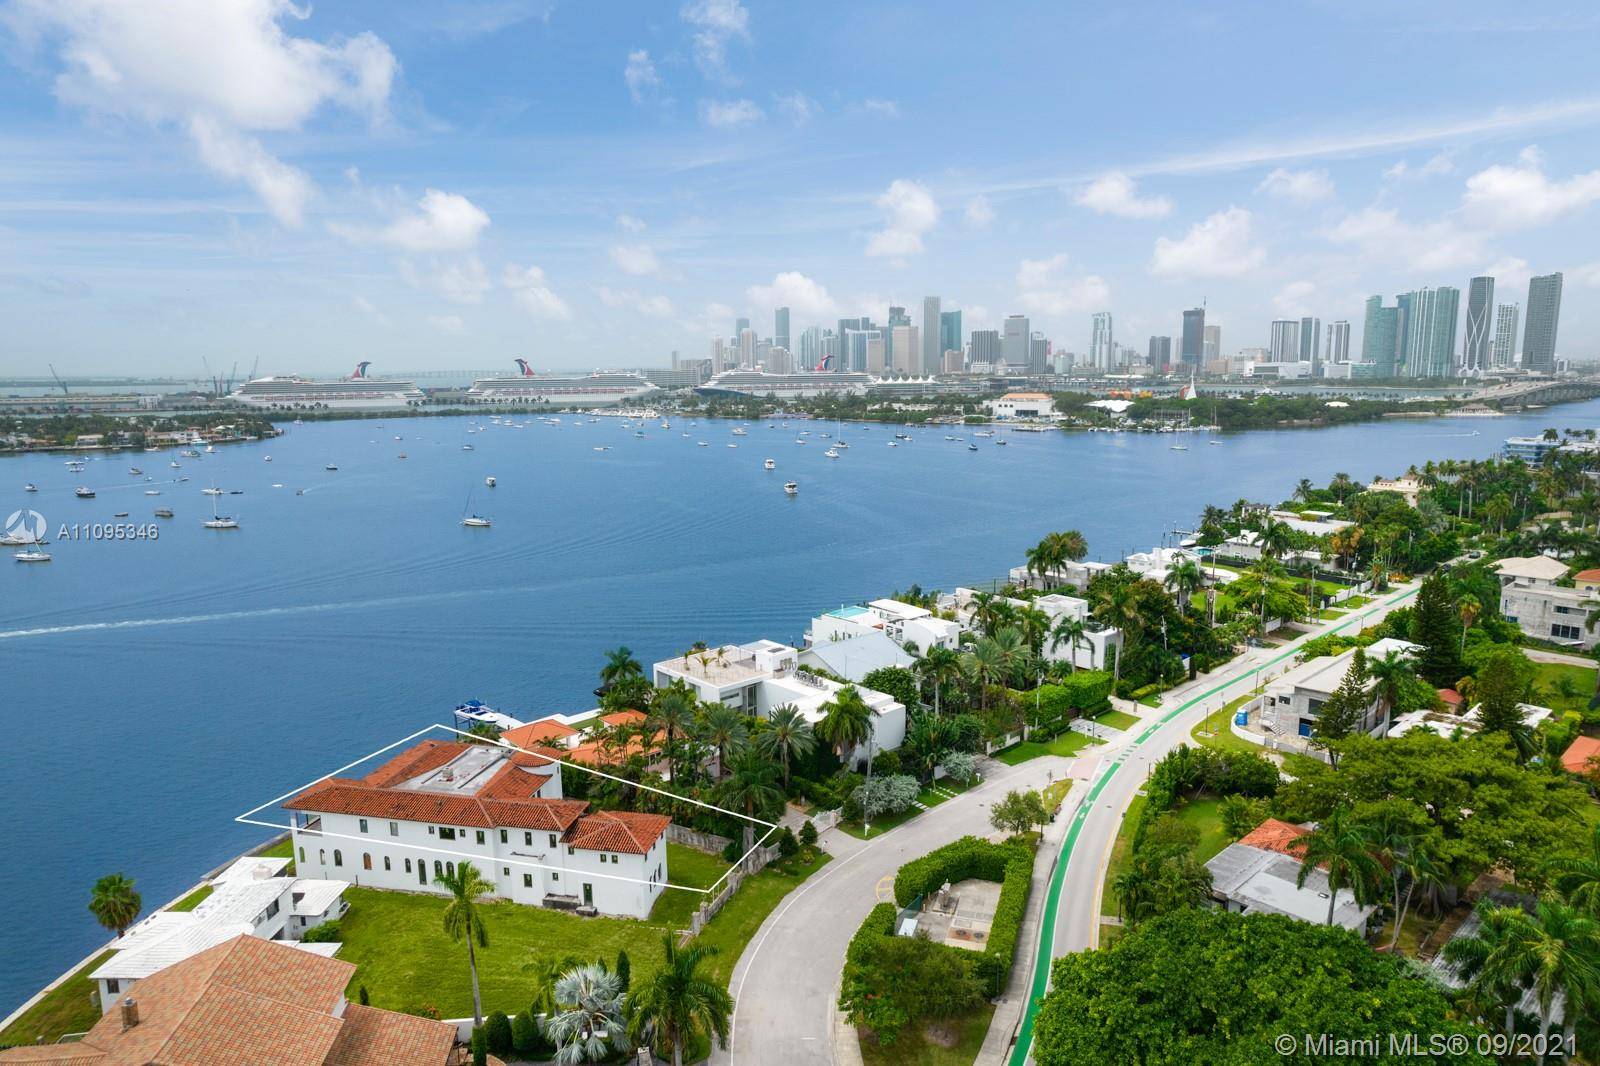 Step Inside With Me ! An incredible opportunity to finish your dream home in one of the most coveted neighborhoods in Miami The Venetian Islands.